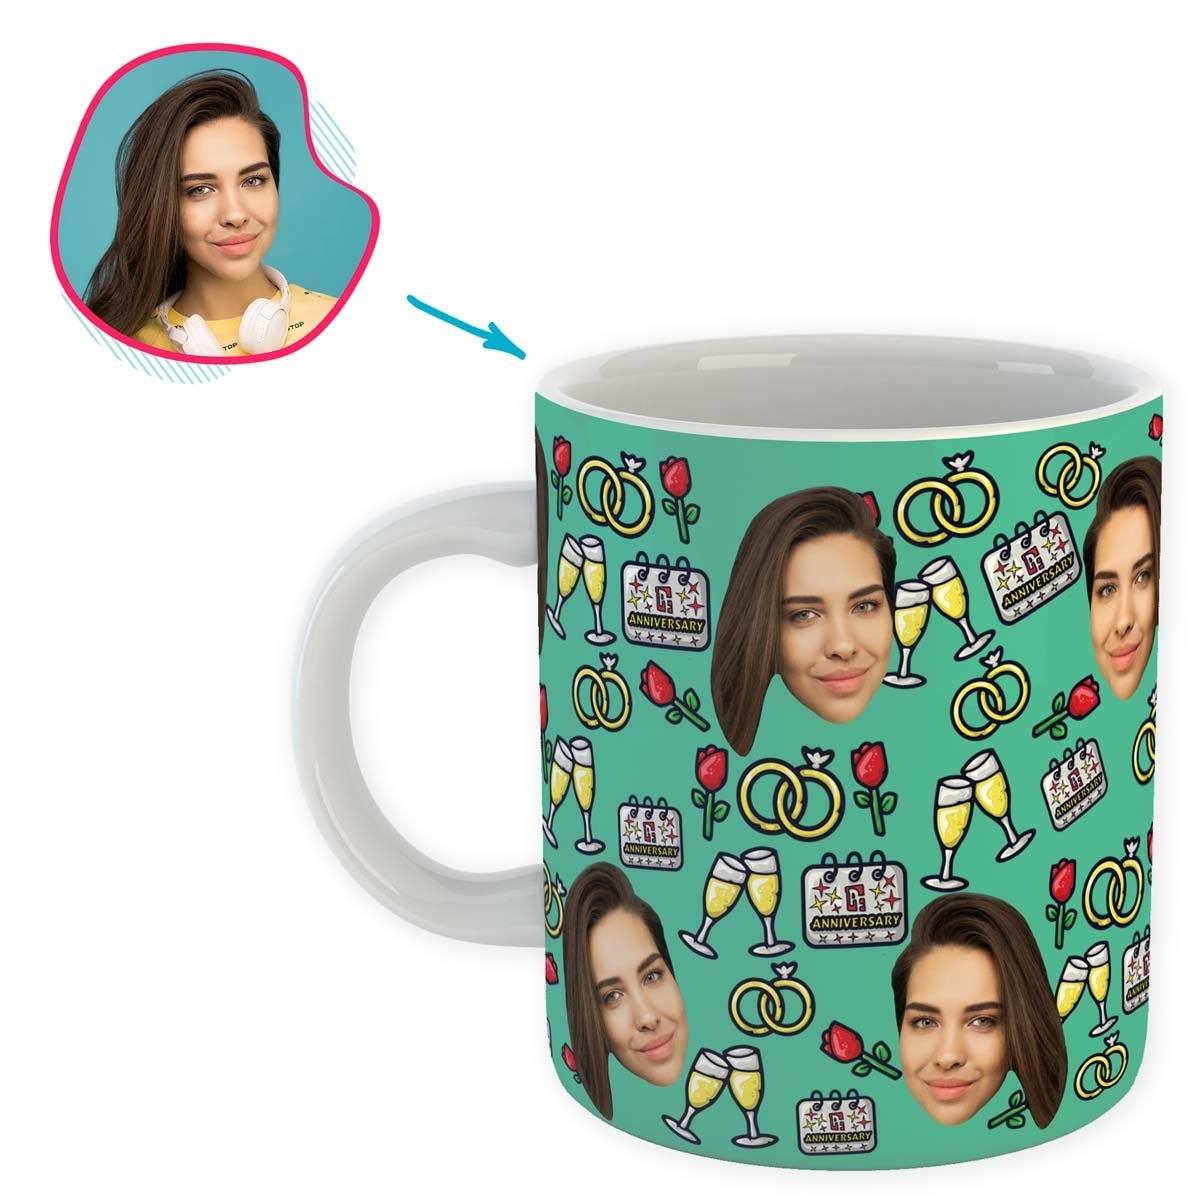 Mint Anniversary personalized mug with photo of face printed on it